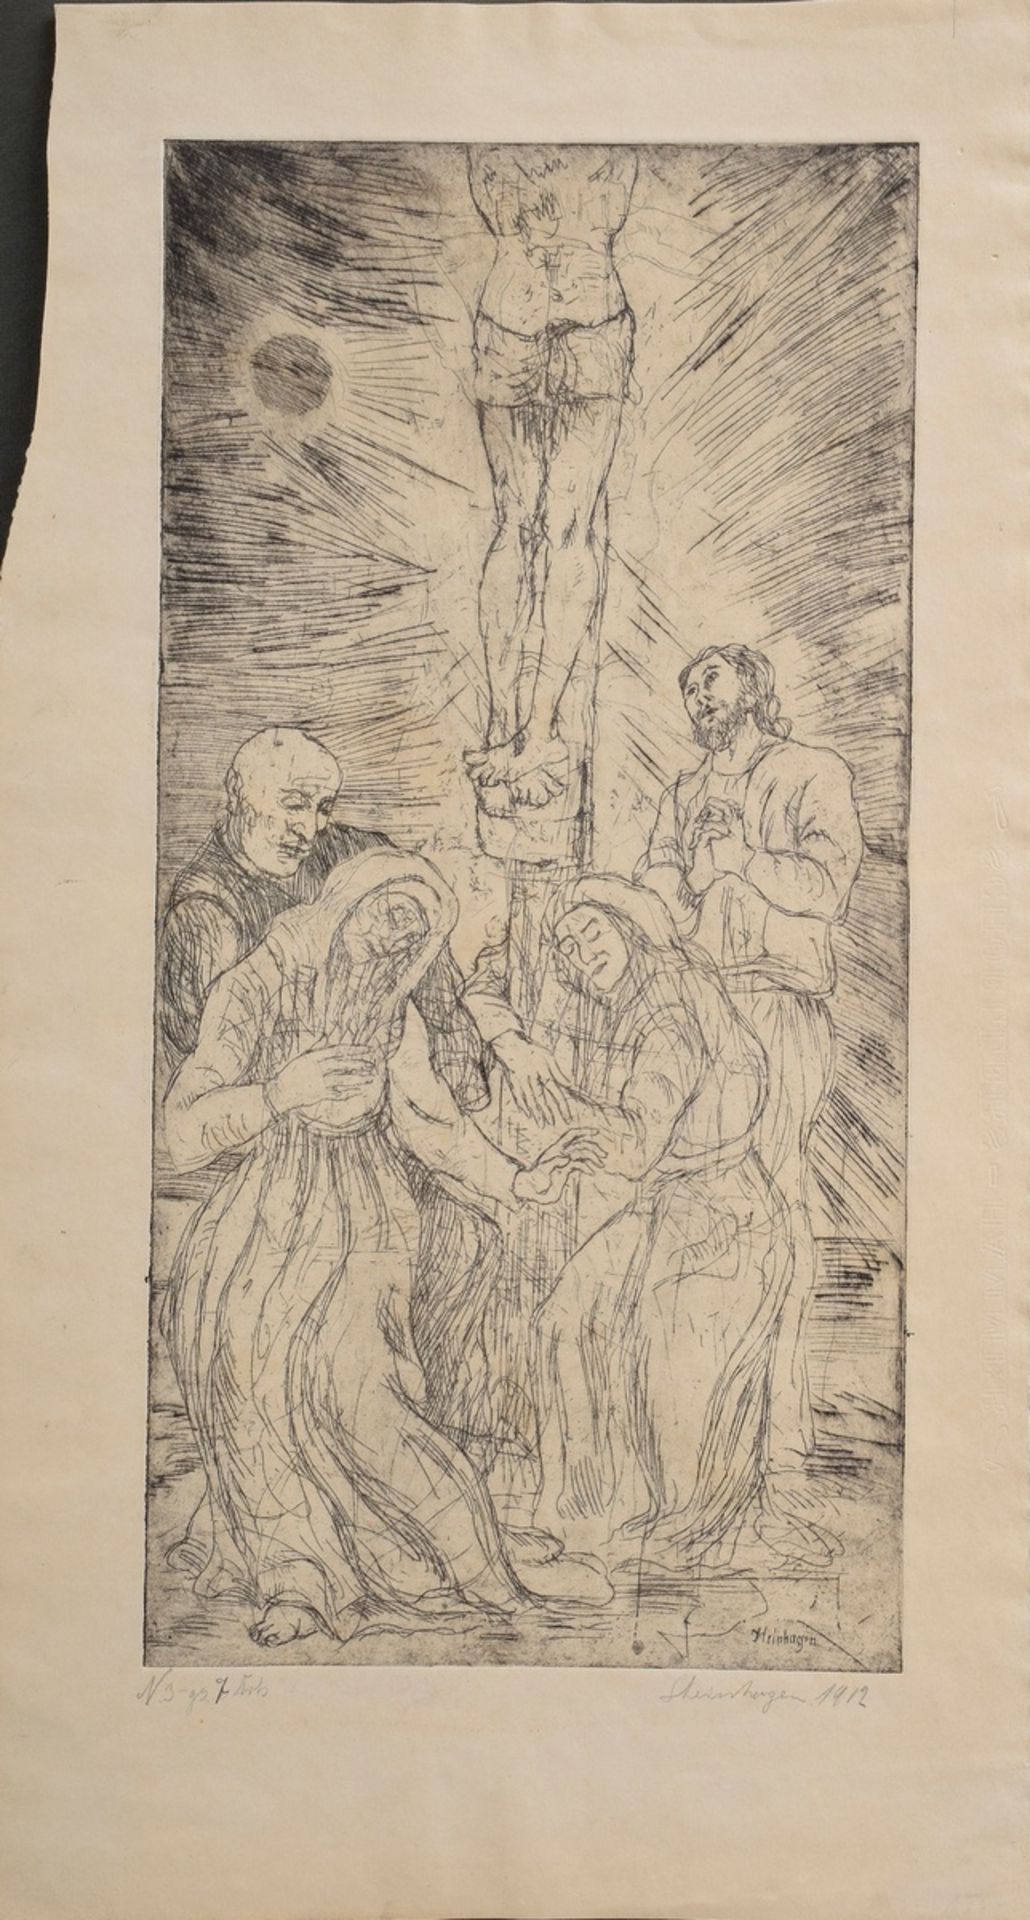 3 Steinhagen, Heinrich (1880-1948) "Christian Scenes", etchings, signed on the plate, 1x titled, si - Image 6 of 7